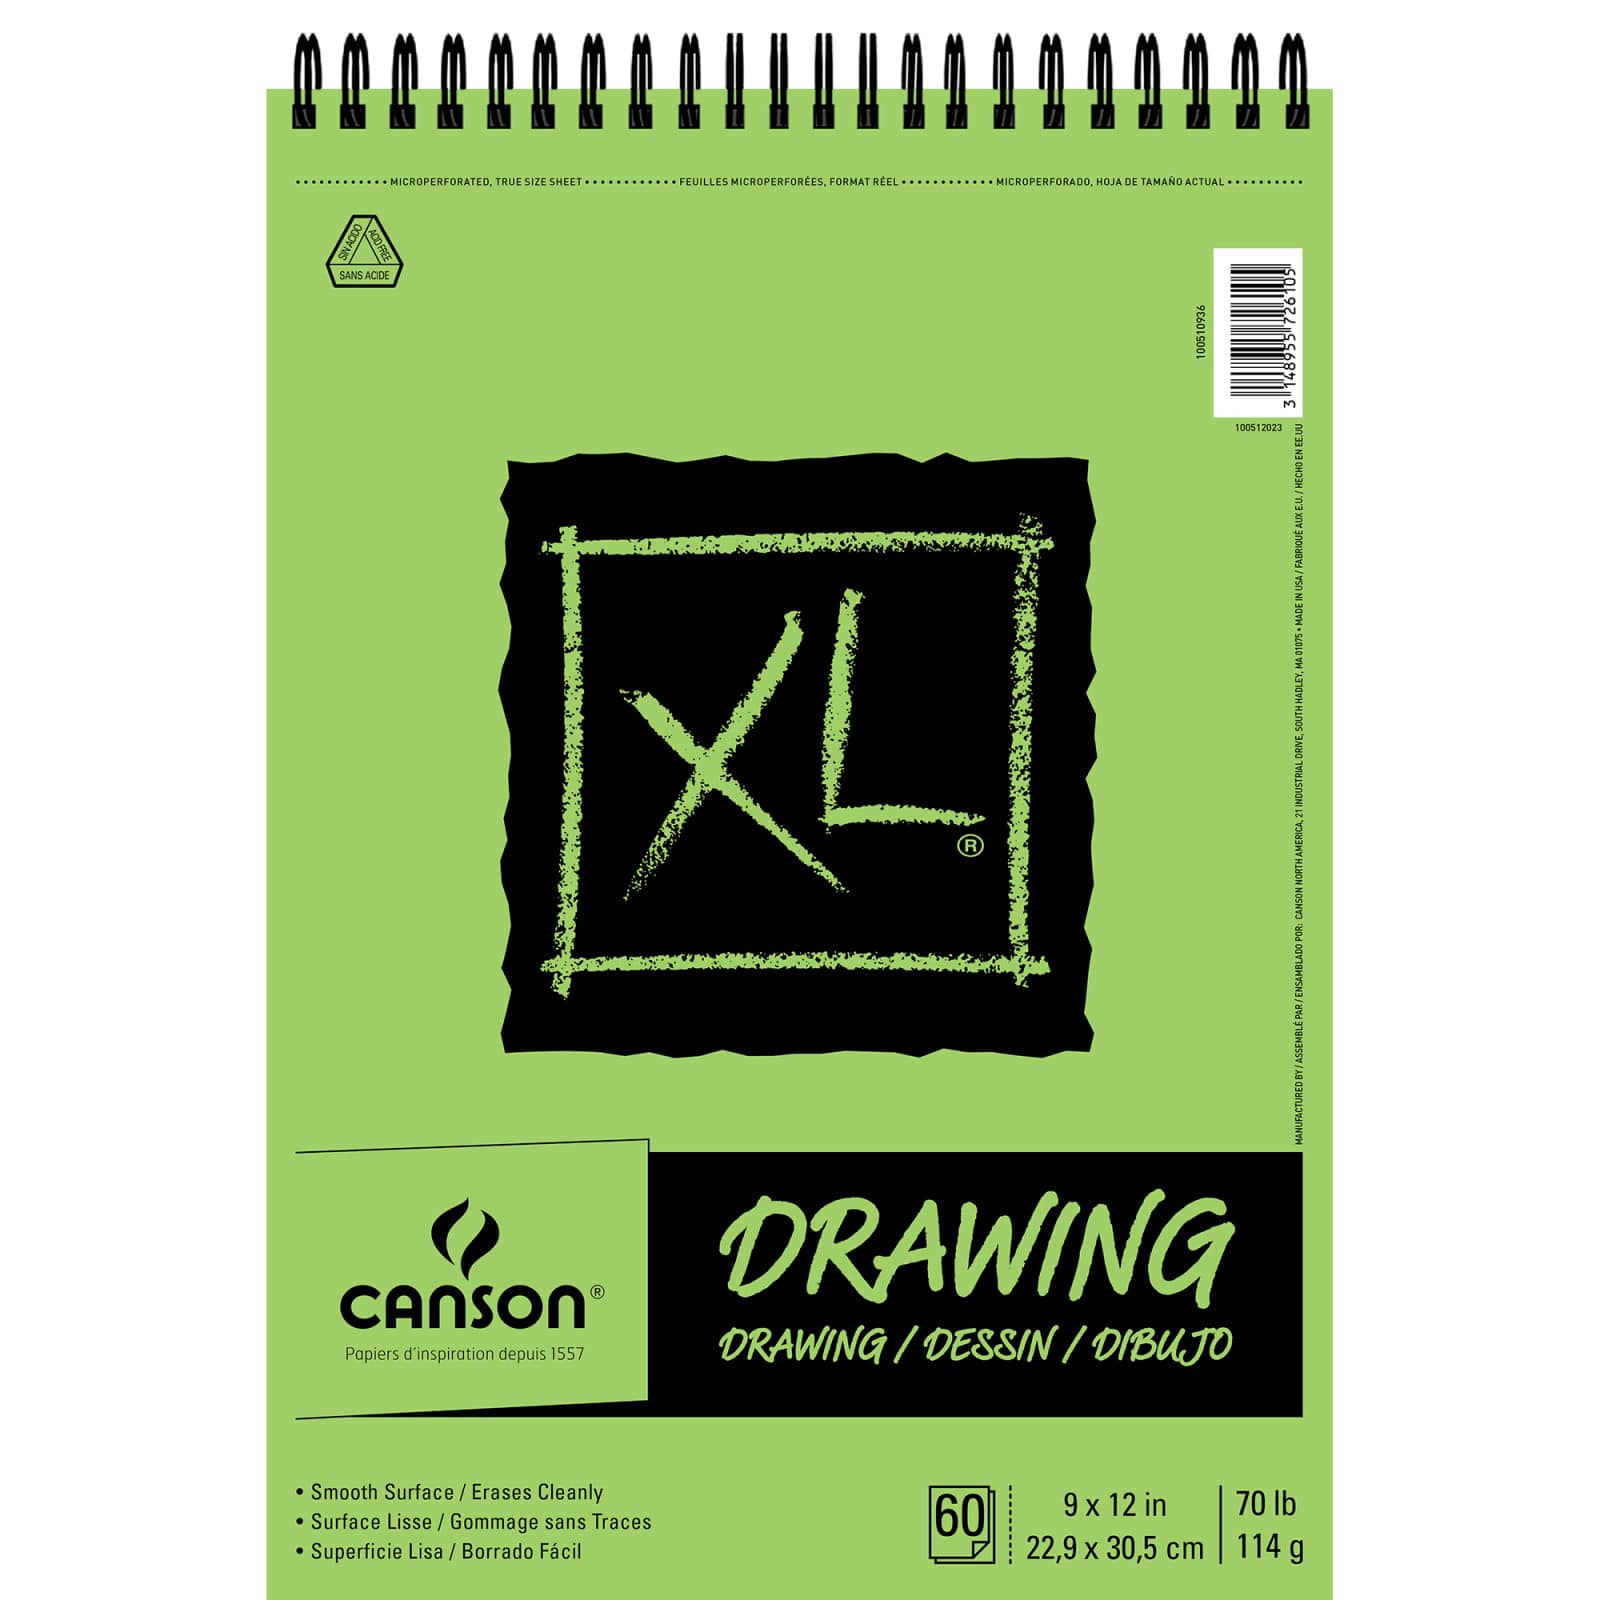 Canson XL Sketch Pads